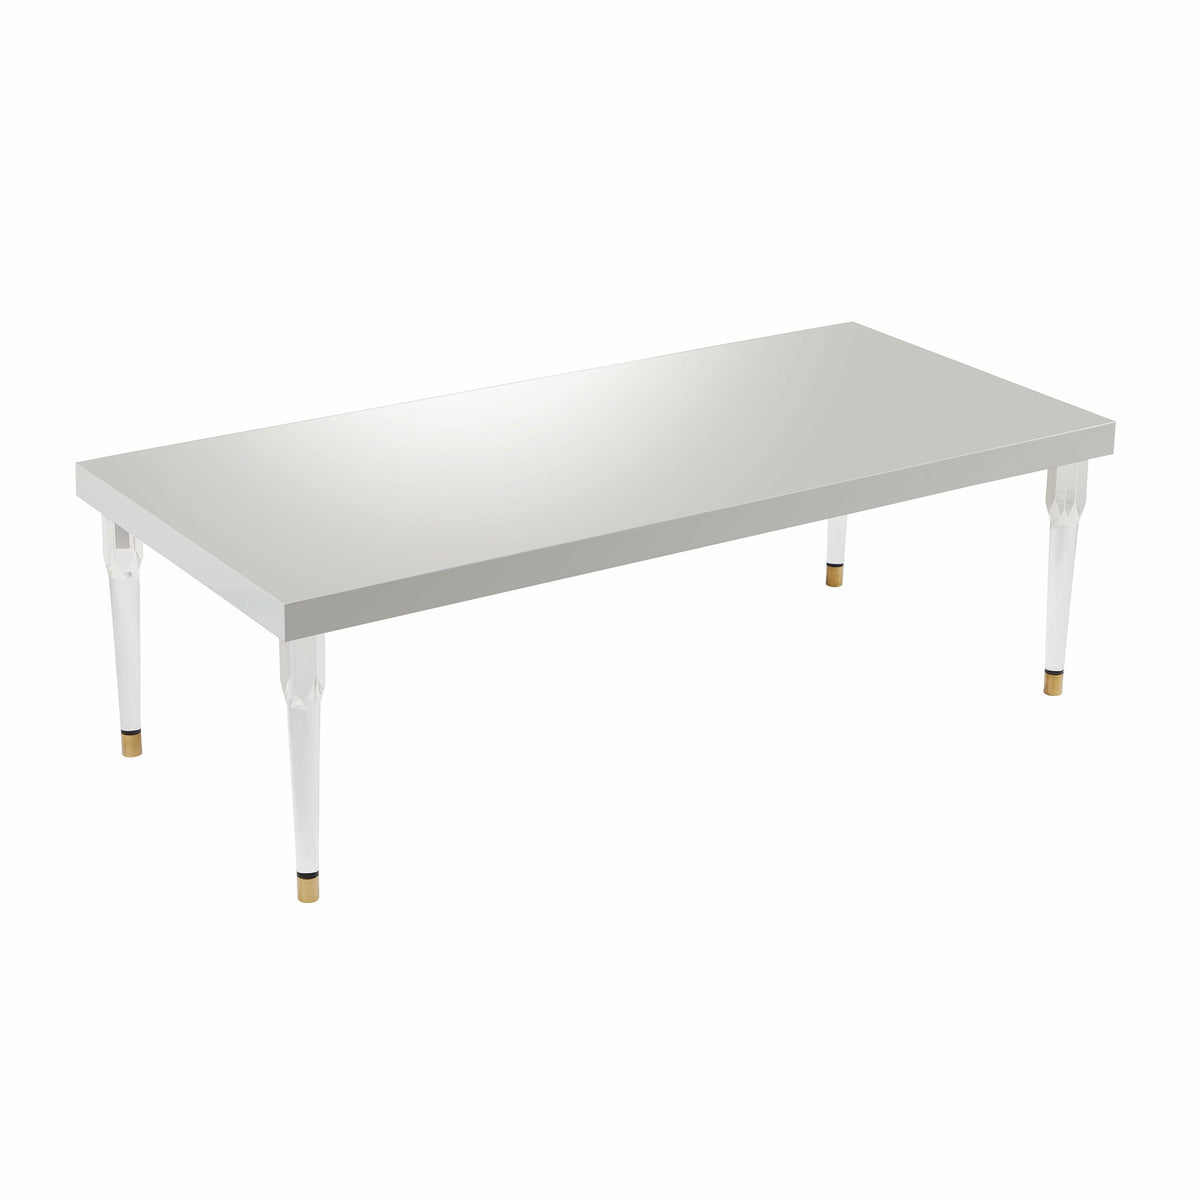 Tabby Glossy Lacquer Dining Table White - Be Bold Furniture